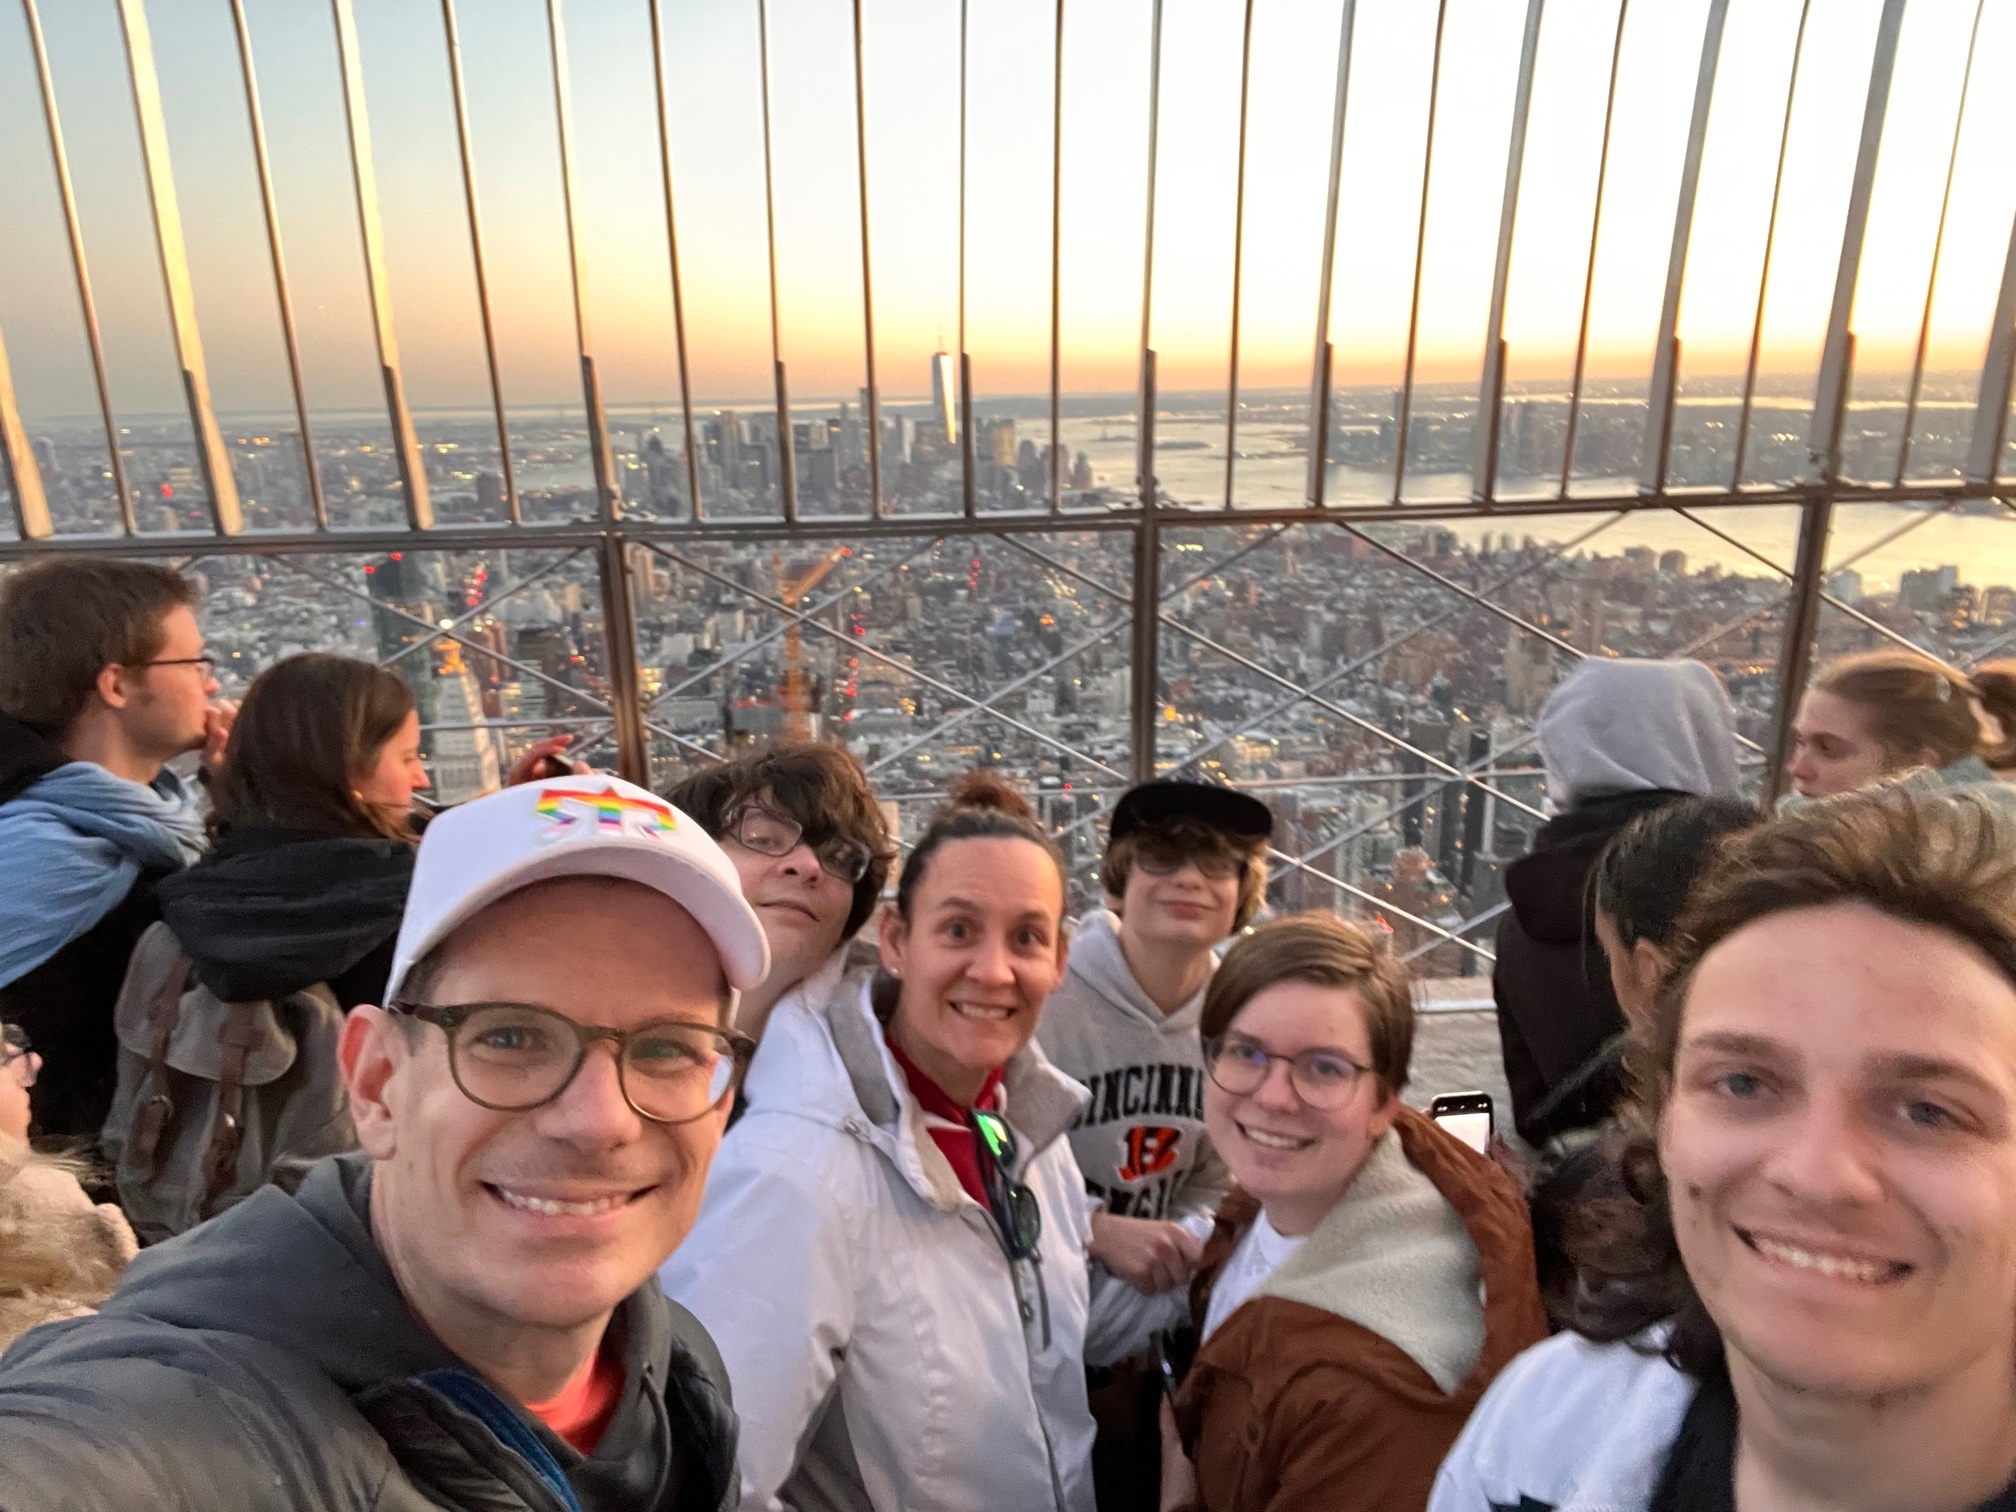 Pfeiffer and his family taking a selfie on a balcony overlooking a city at sunset